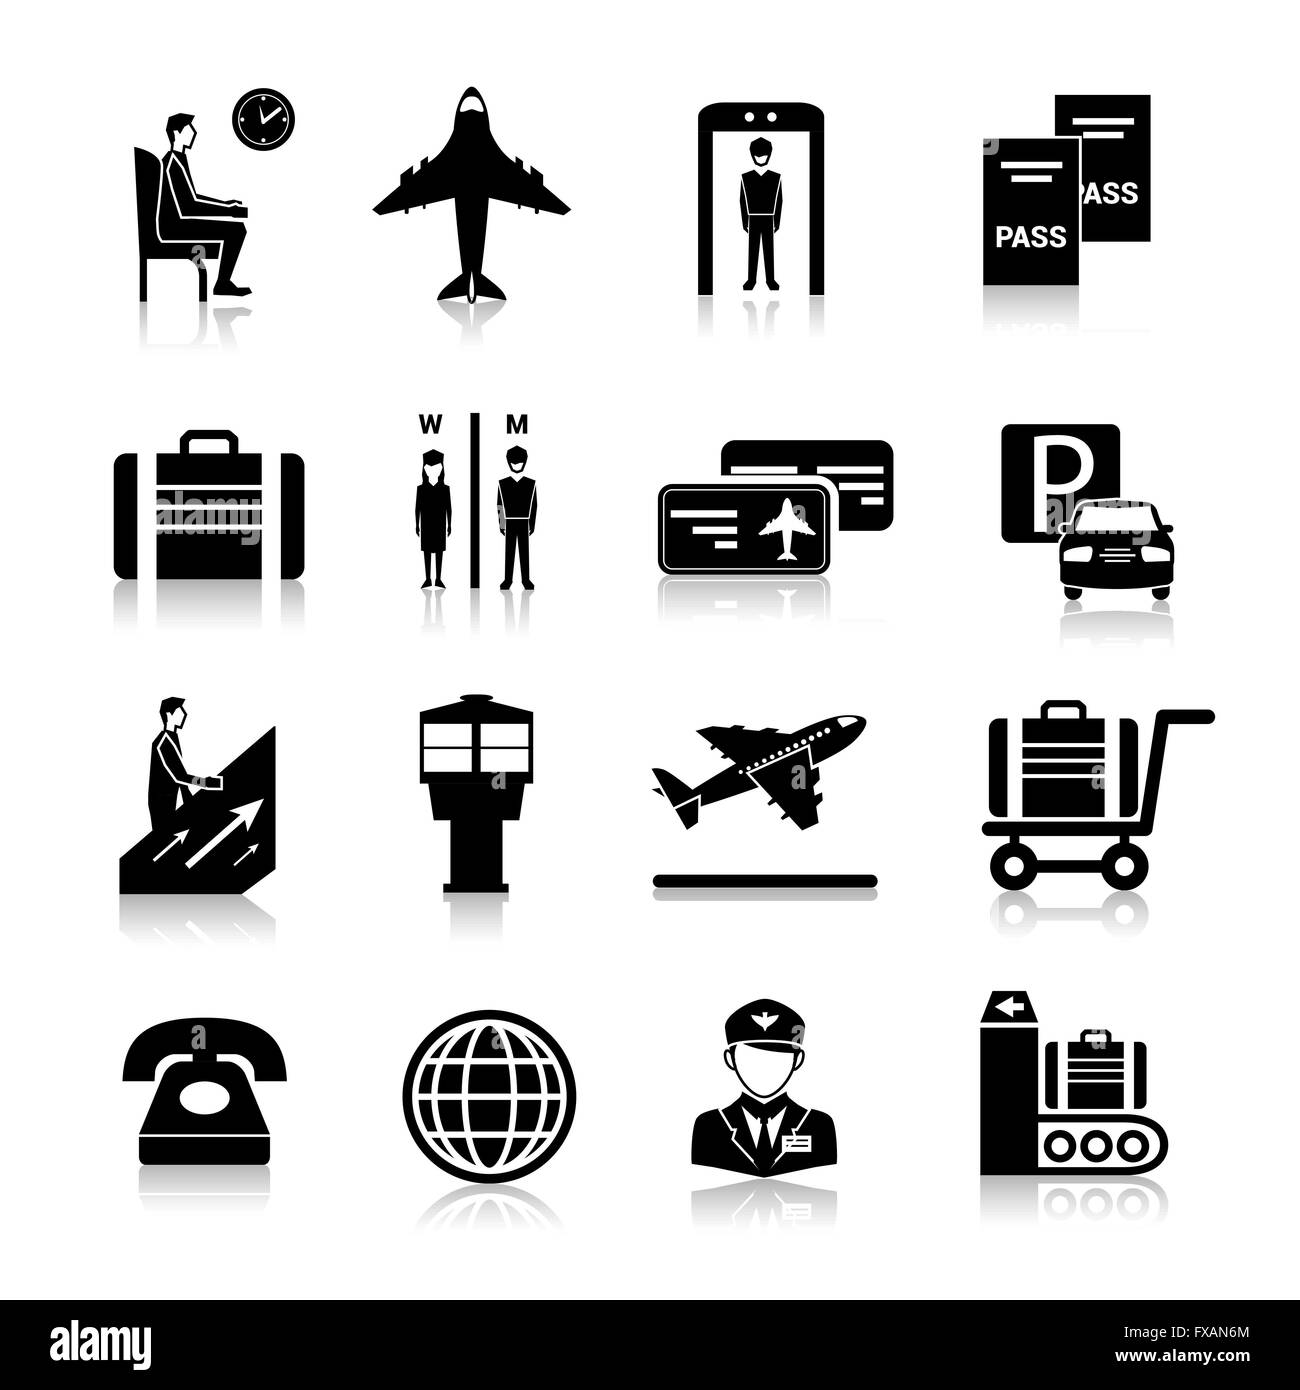 Airport Icons Black Stock Vector